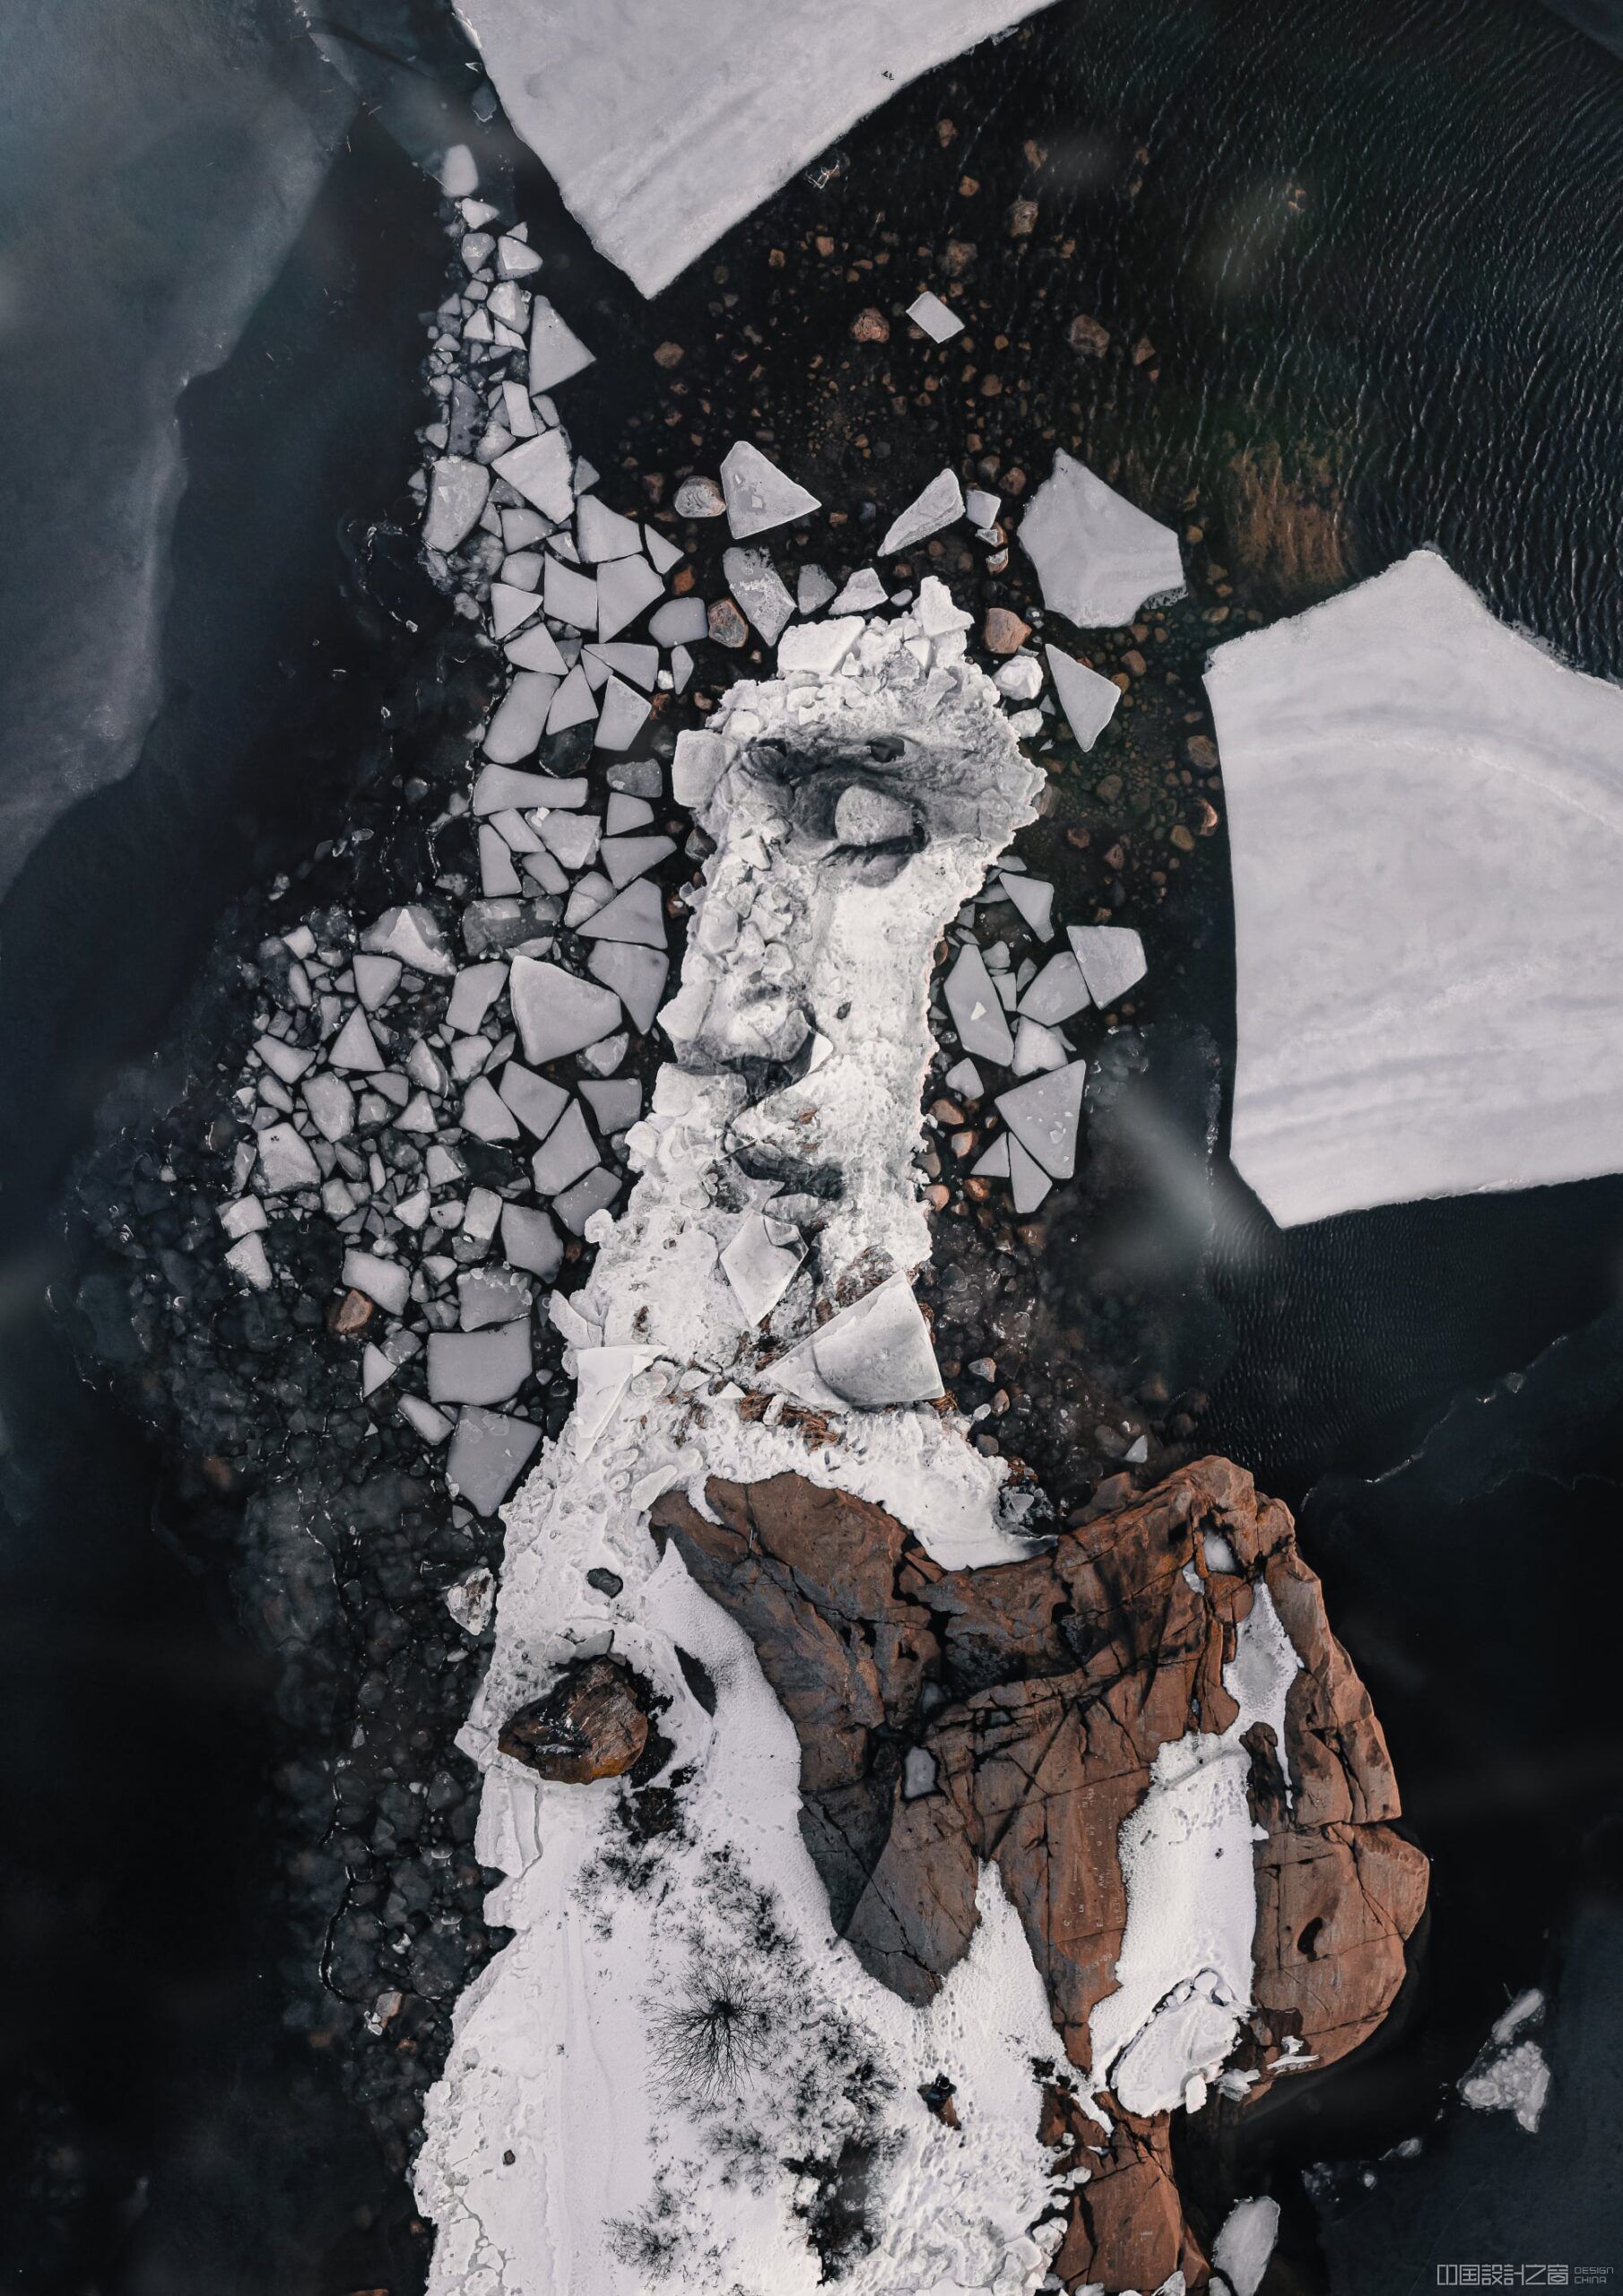 A portrait of a man is rendered on a fractured ice floe